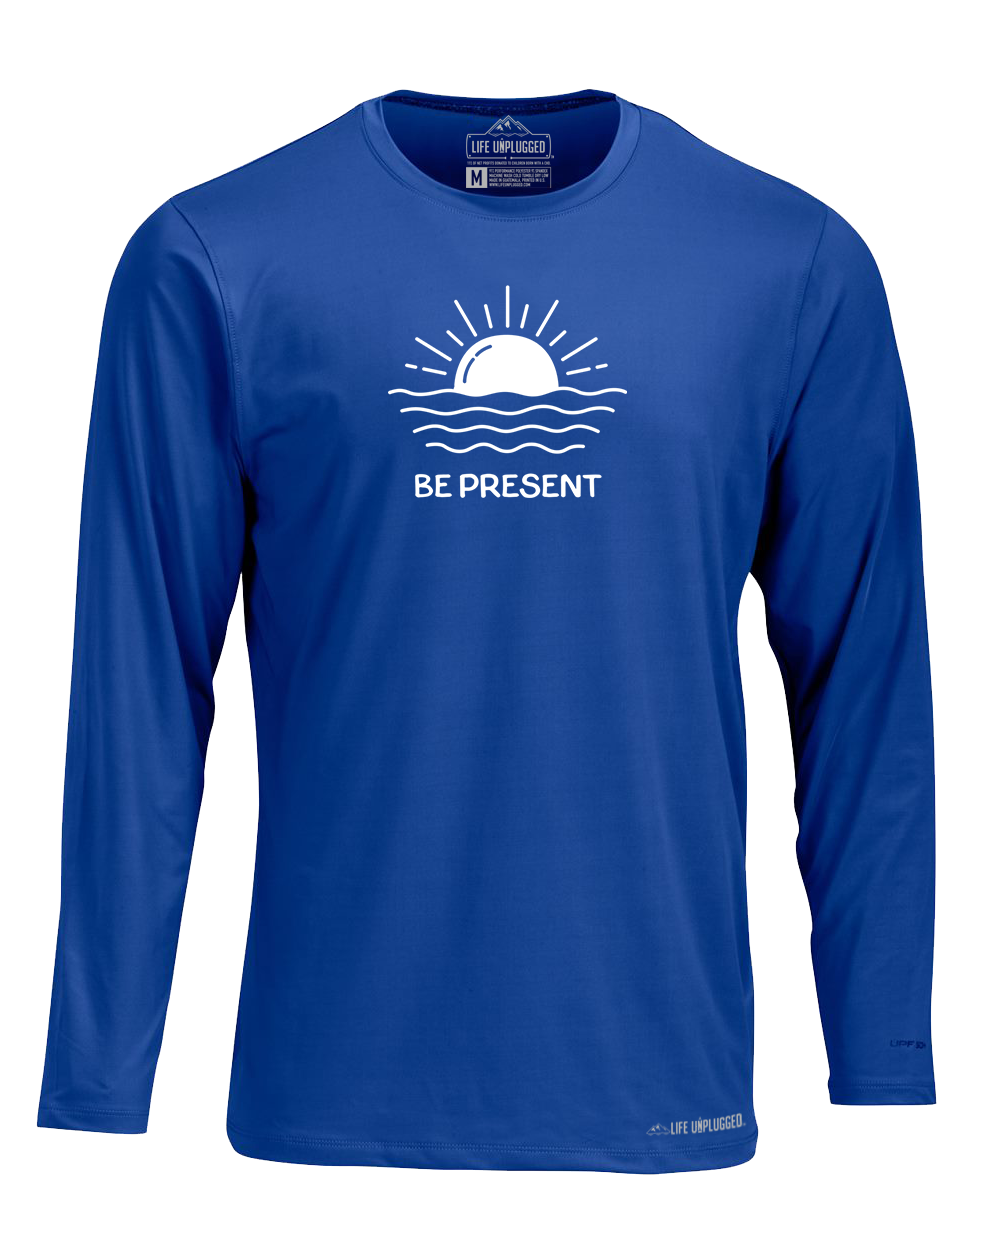 OCEAN SUNSET Poly/Spandex High Performance Long Sleeve with UPF 50+